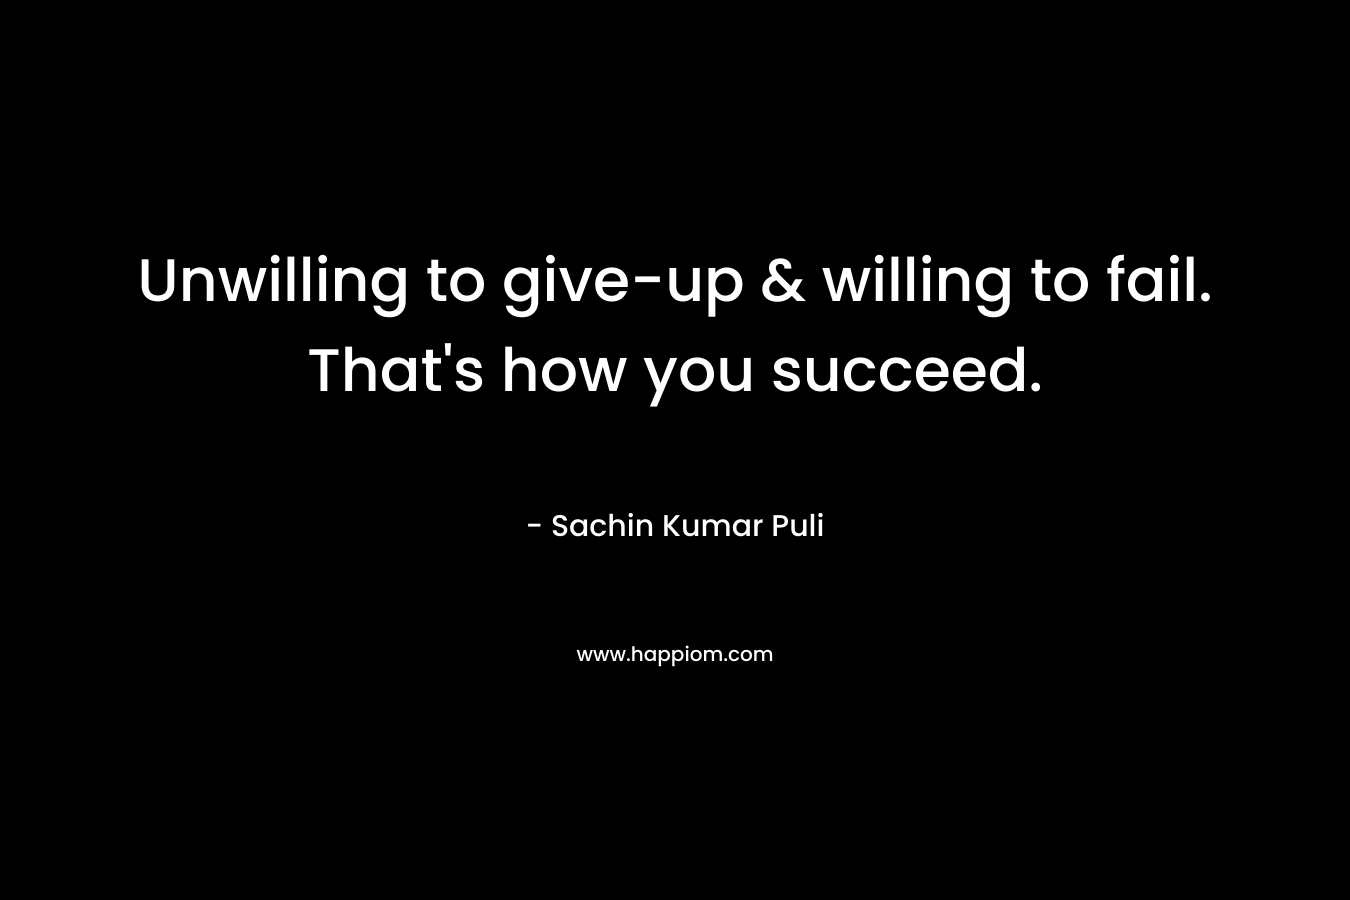 Unwilling to give-up & willing to fail. That's how you succeed.